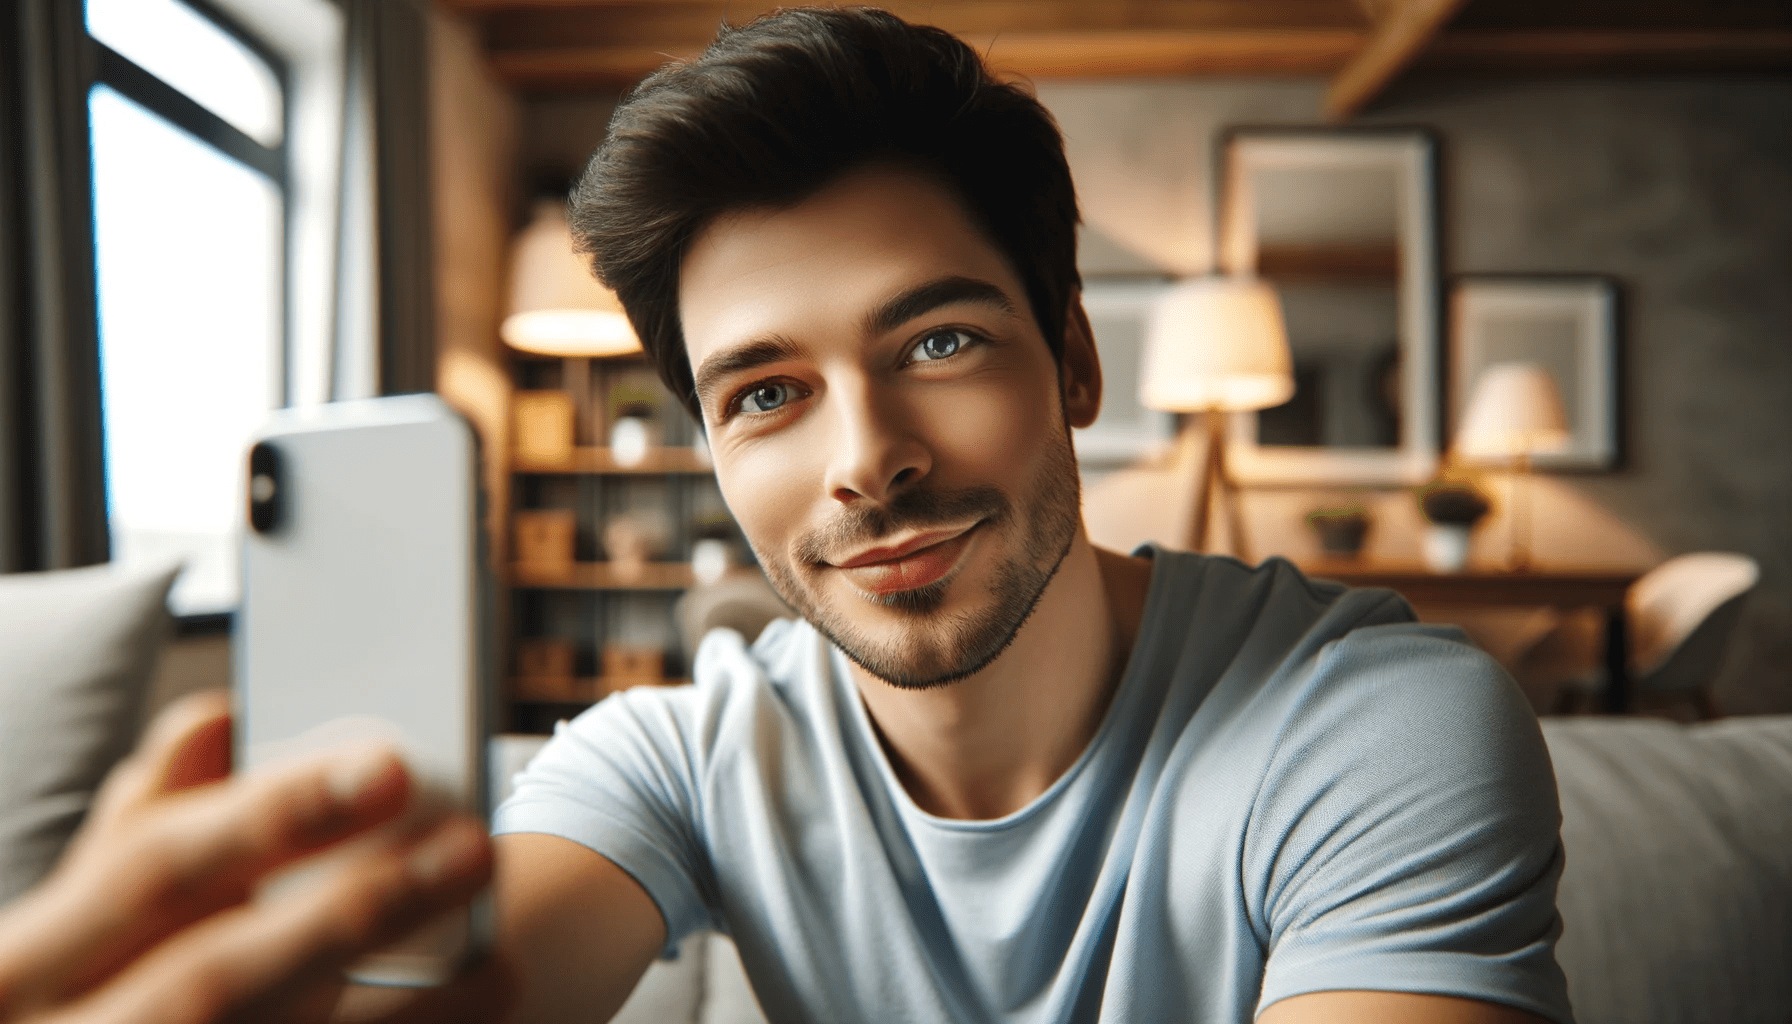 What Does It Mean When a Guy Sends a Full-Face Snap?